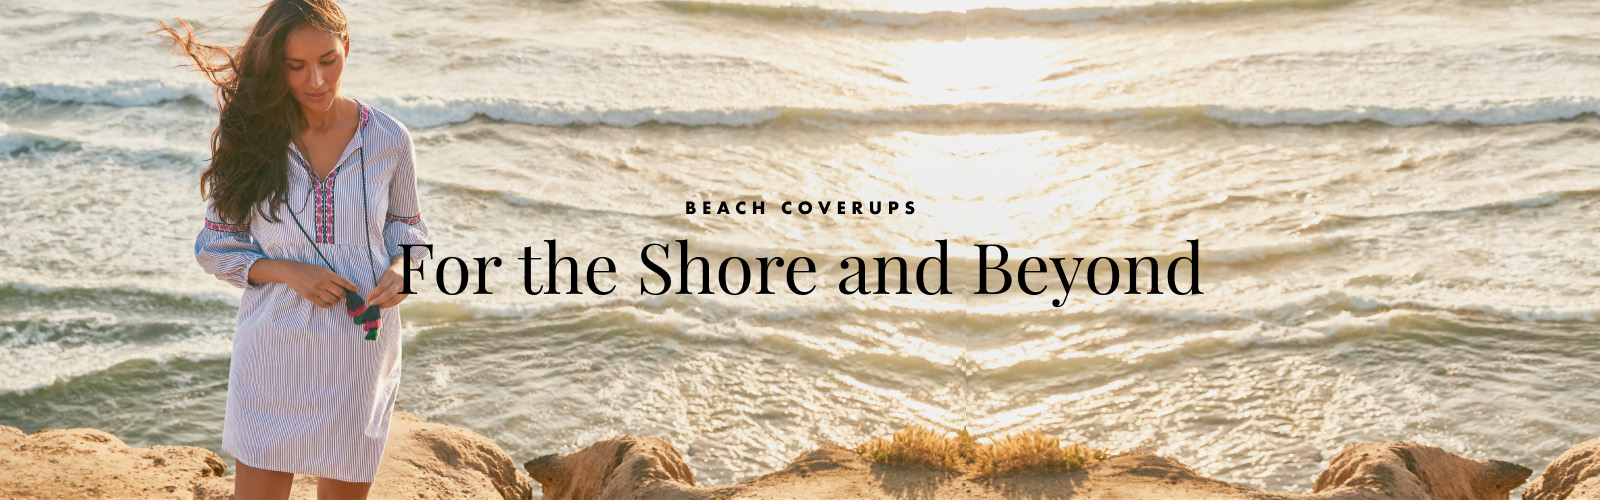 Beach Coverups - For the Shore and Beyond